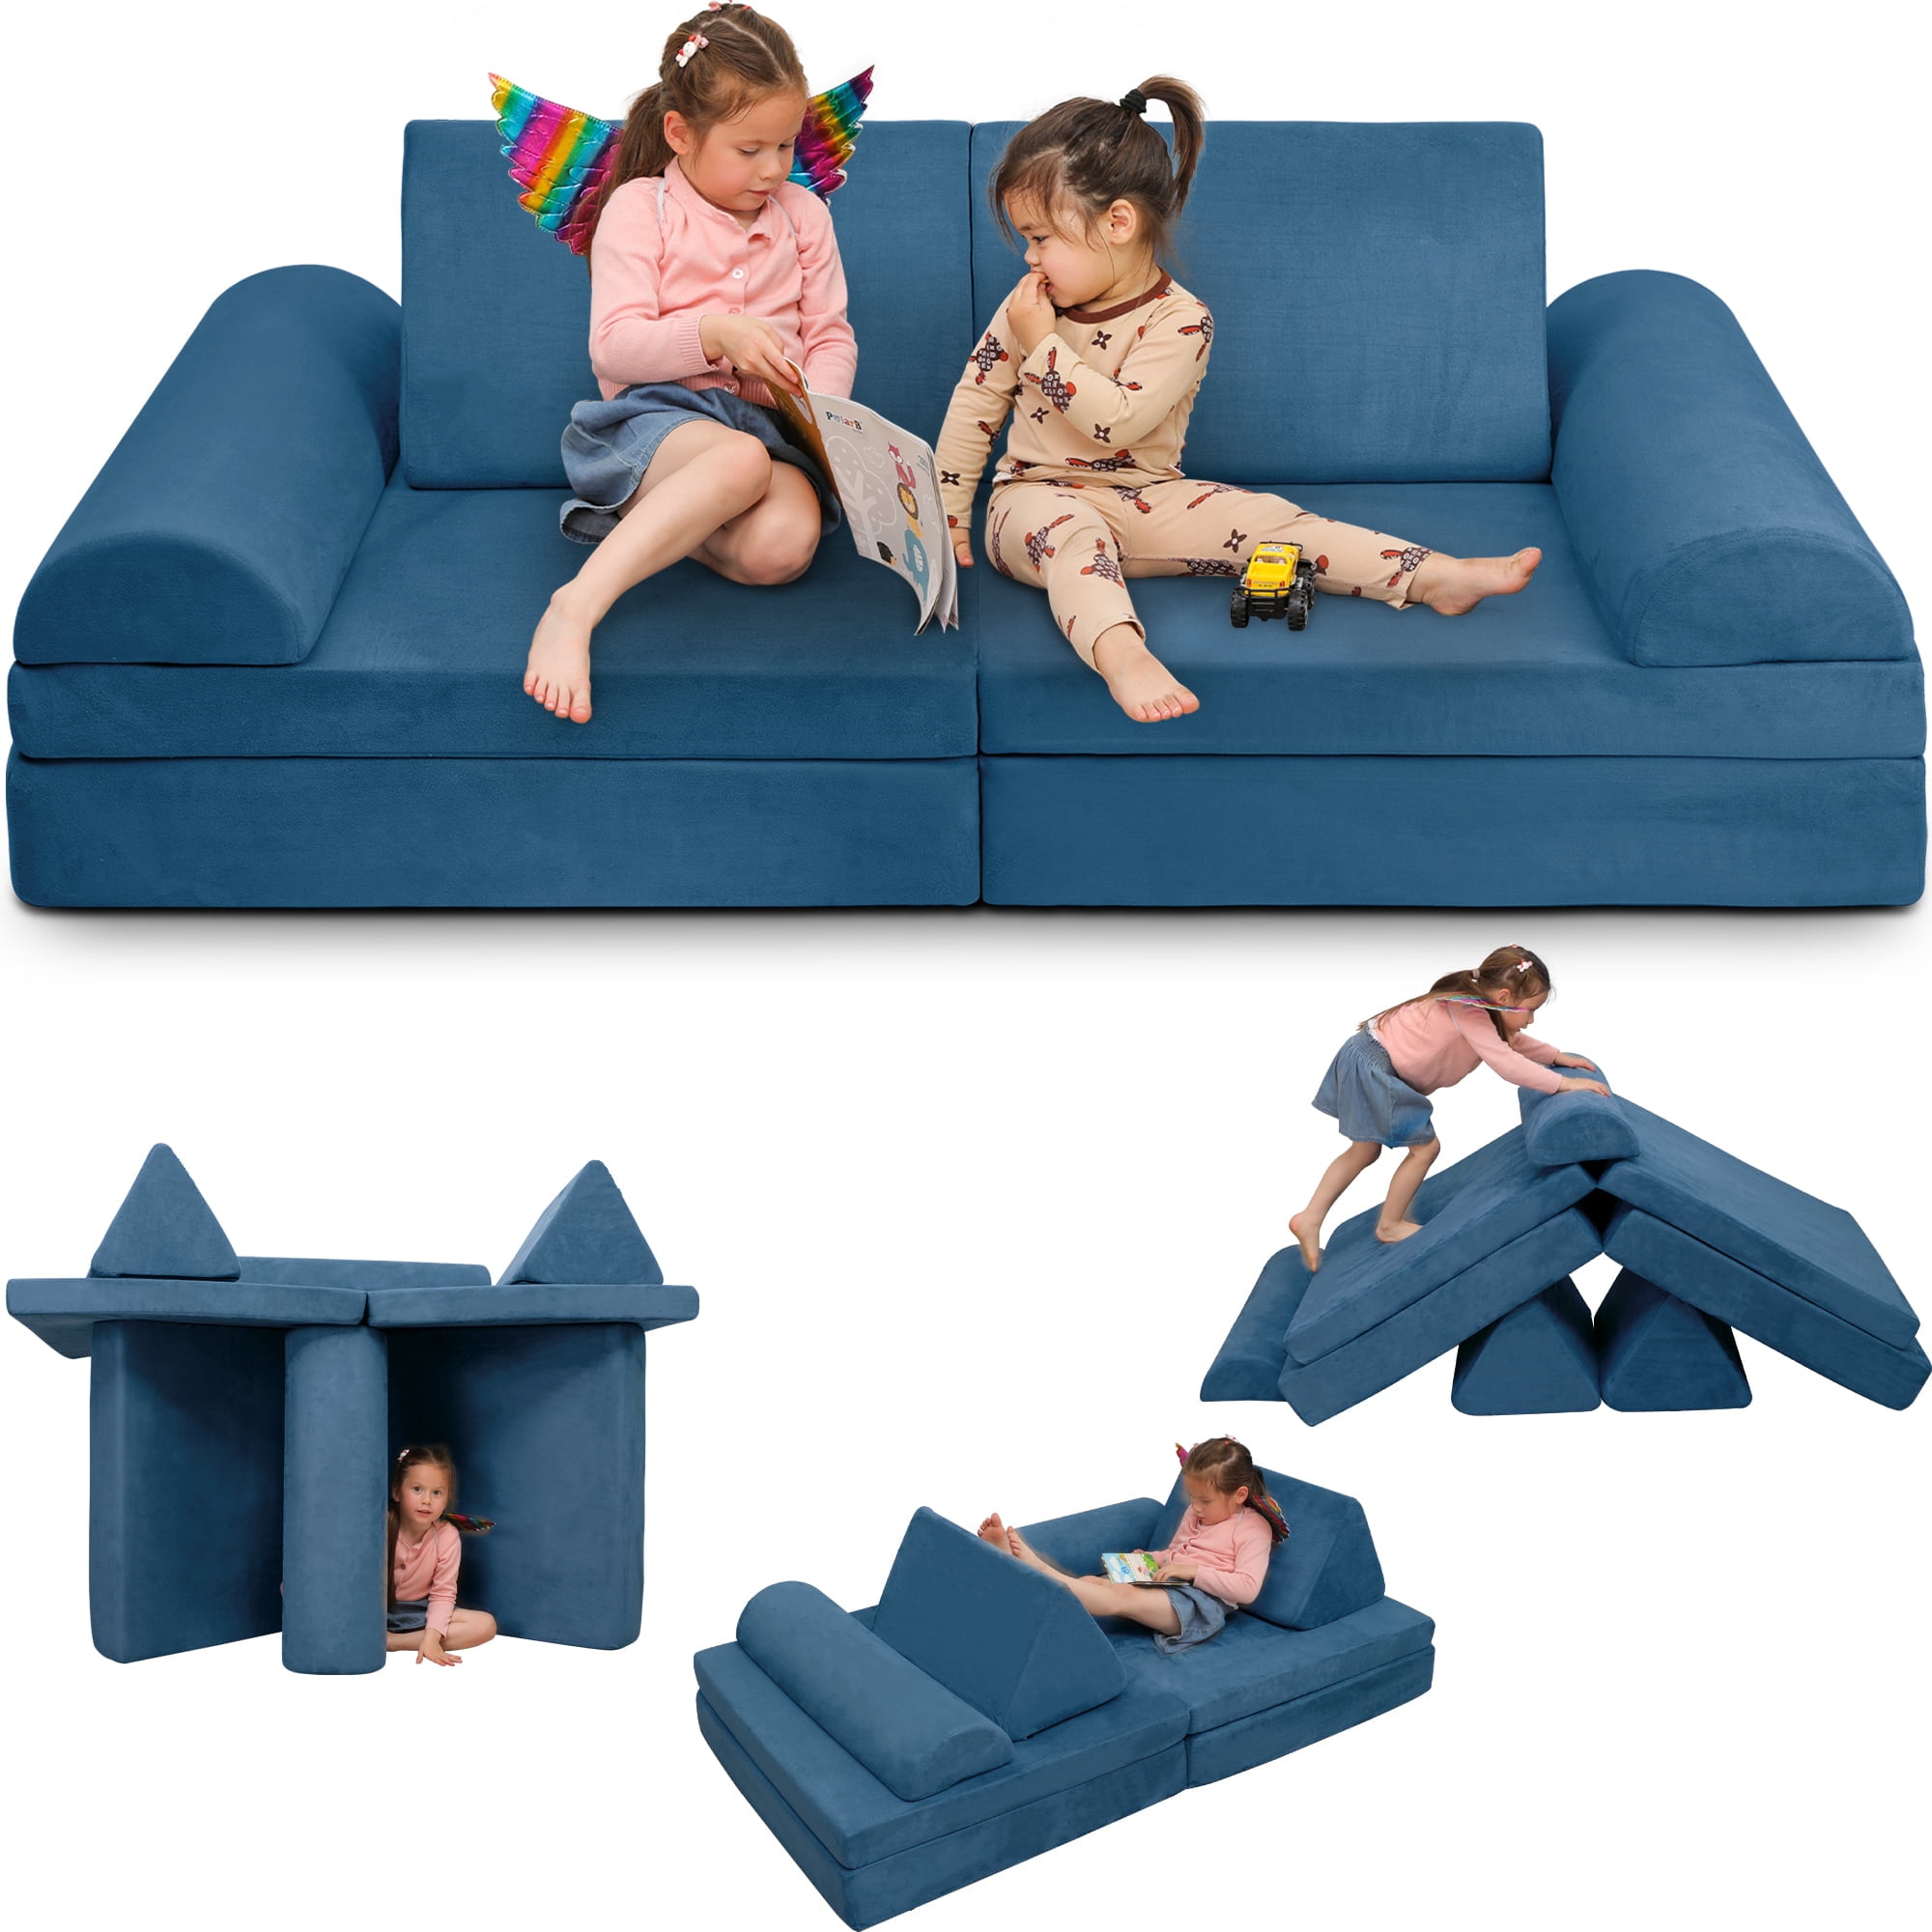 Couch Play Kids 6 Tolead for Furniture, pcs Navy Imaginative Toddlers, Large, Blue